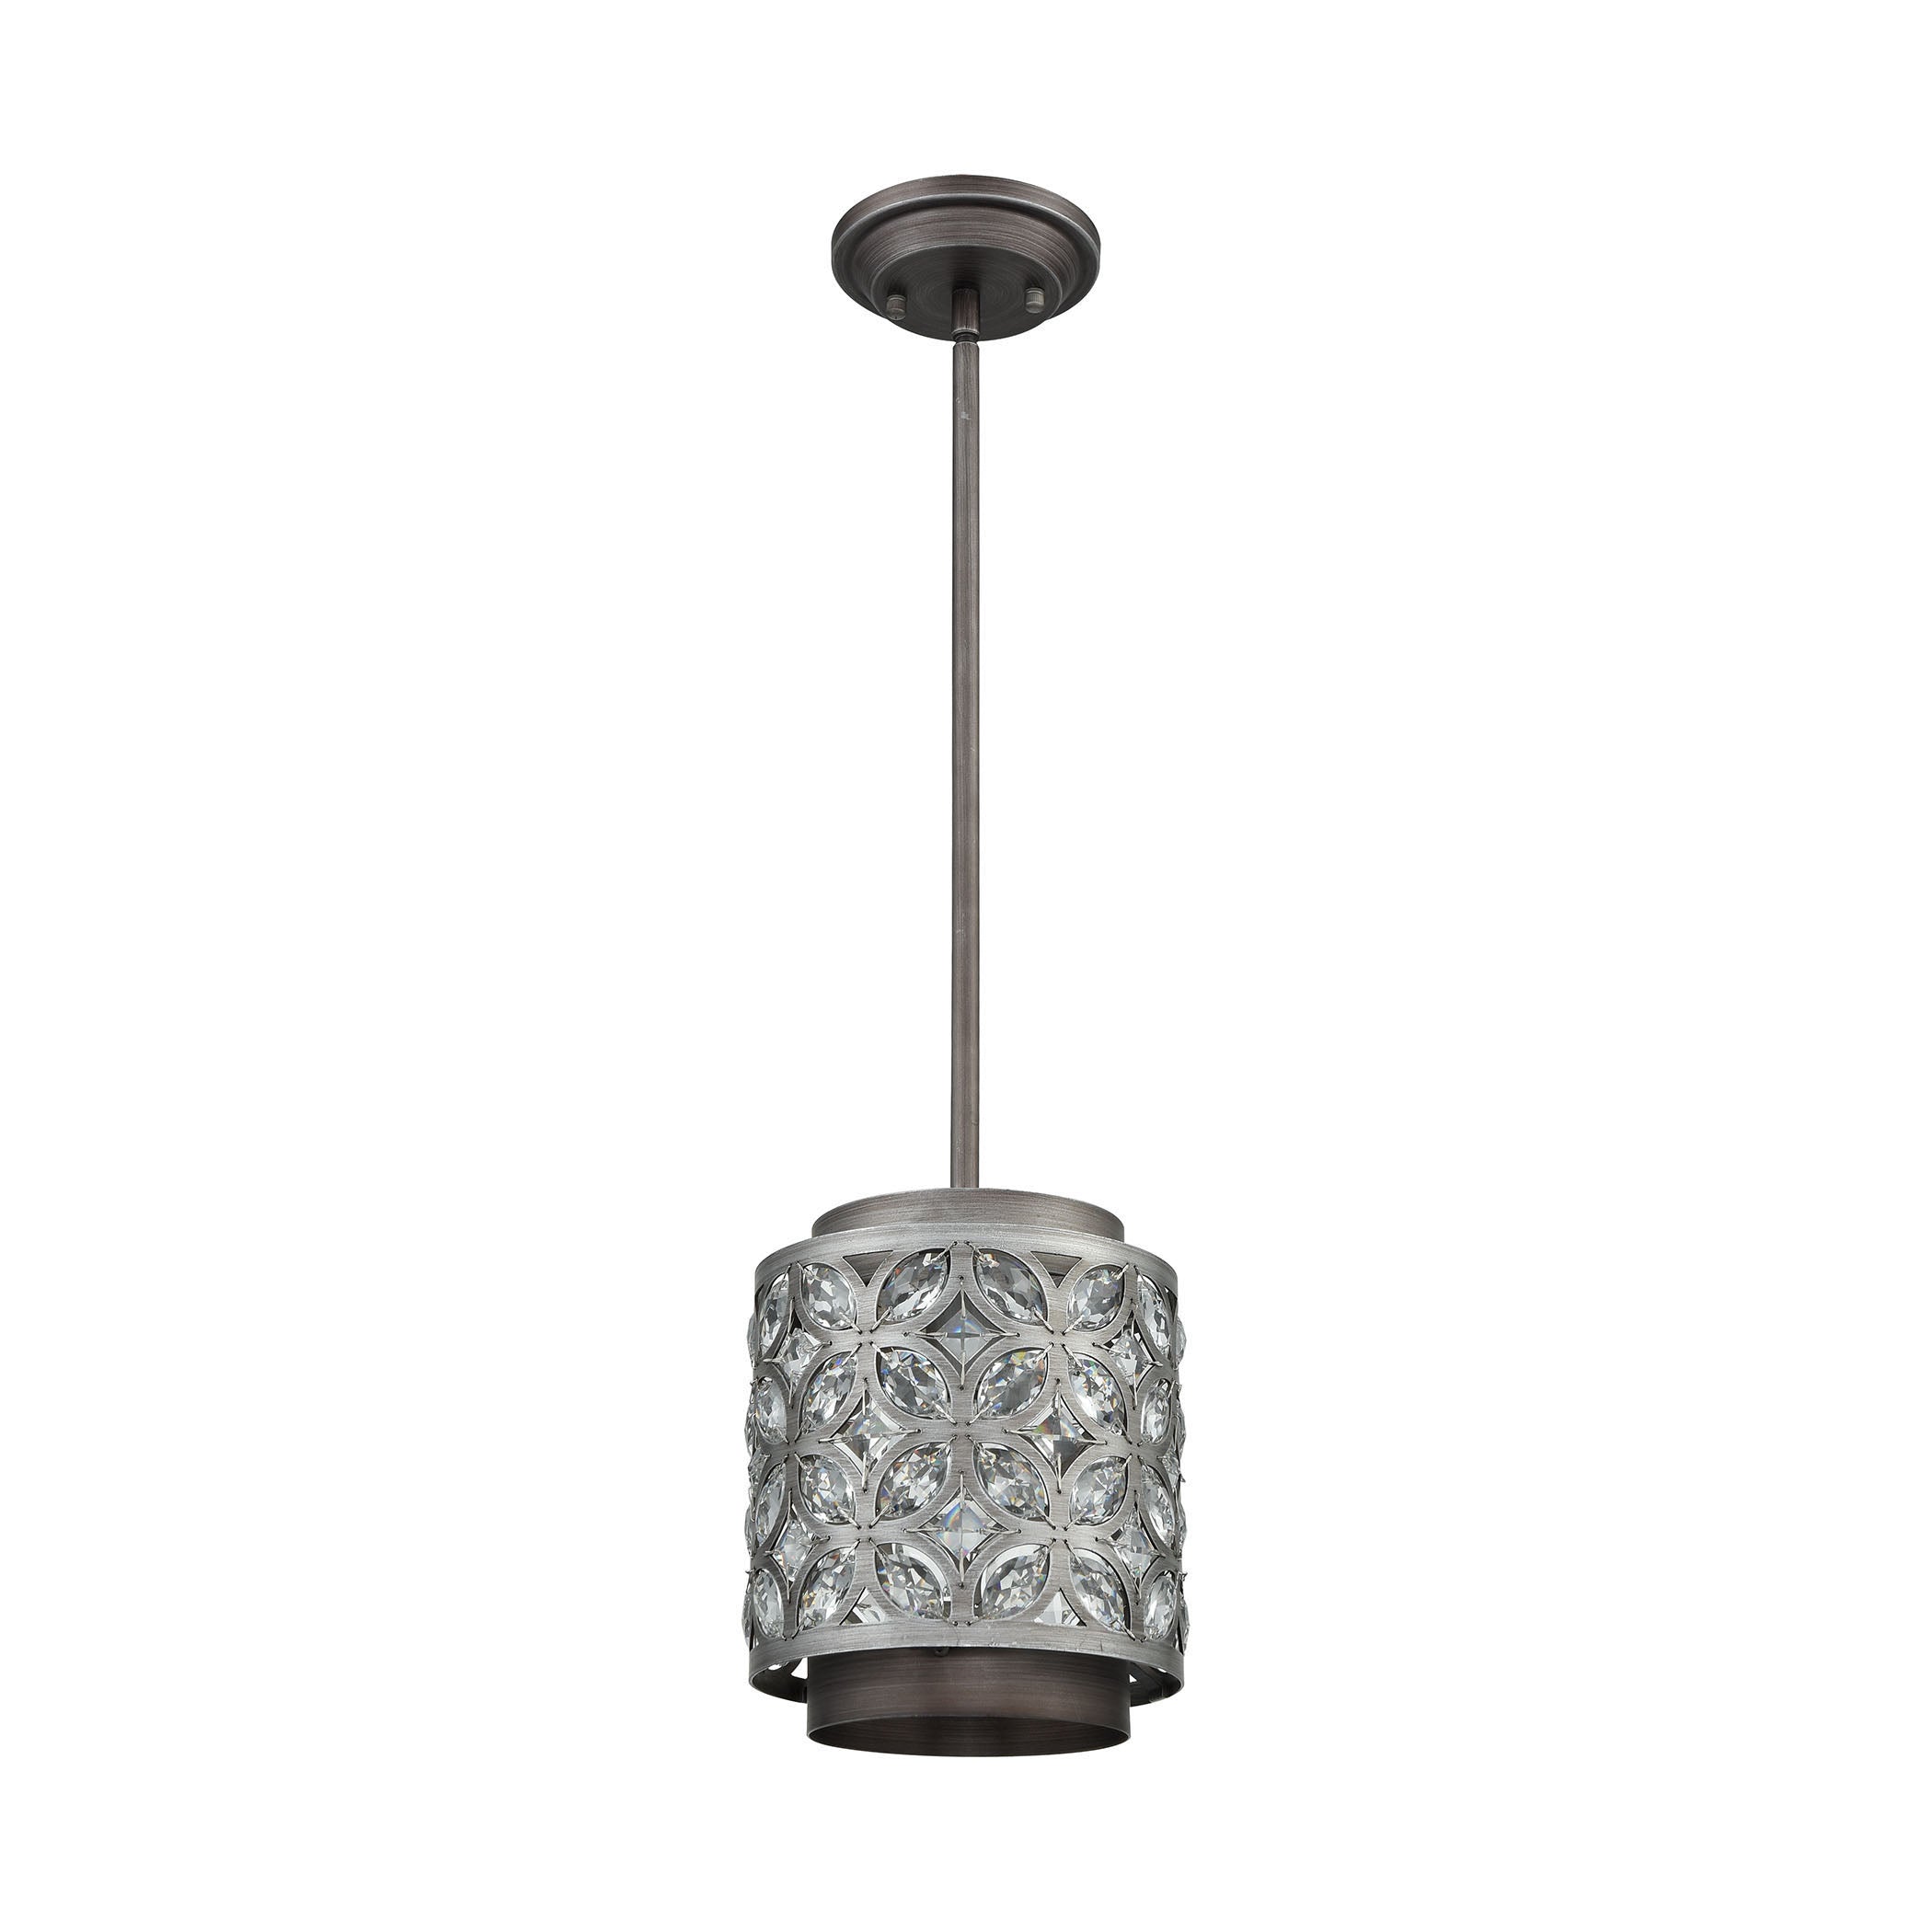 ELK Lighting 12162/1 Rosslyn 1-Light Mini Pendant in Weathered Zinc and Matte Silver with Crystal and Metalwork Shade